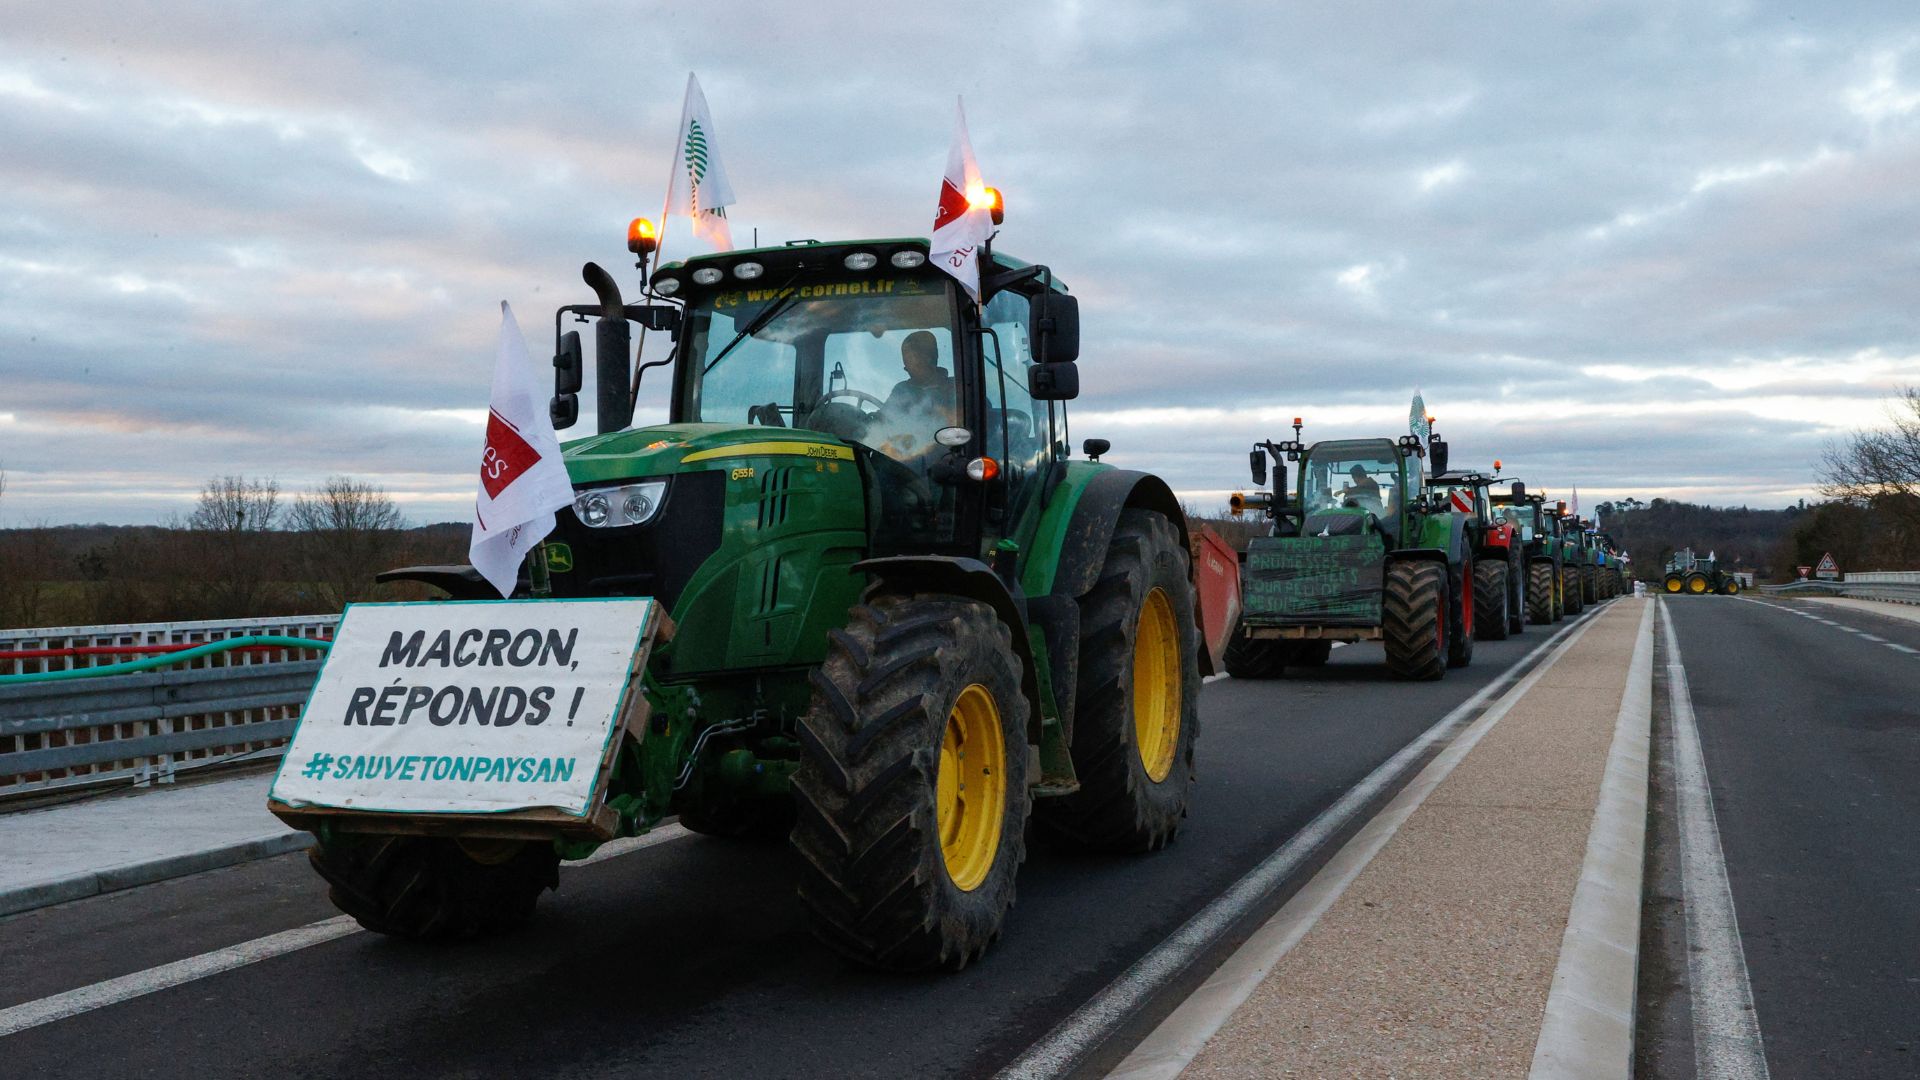 French farmers block a highway with their tractors during a protest. /Abdul Saboor/Reuters